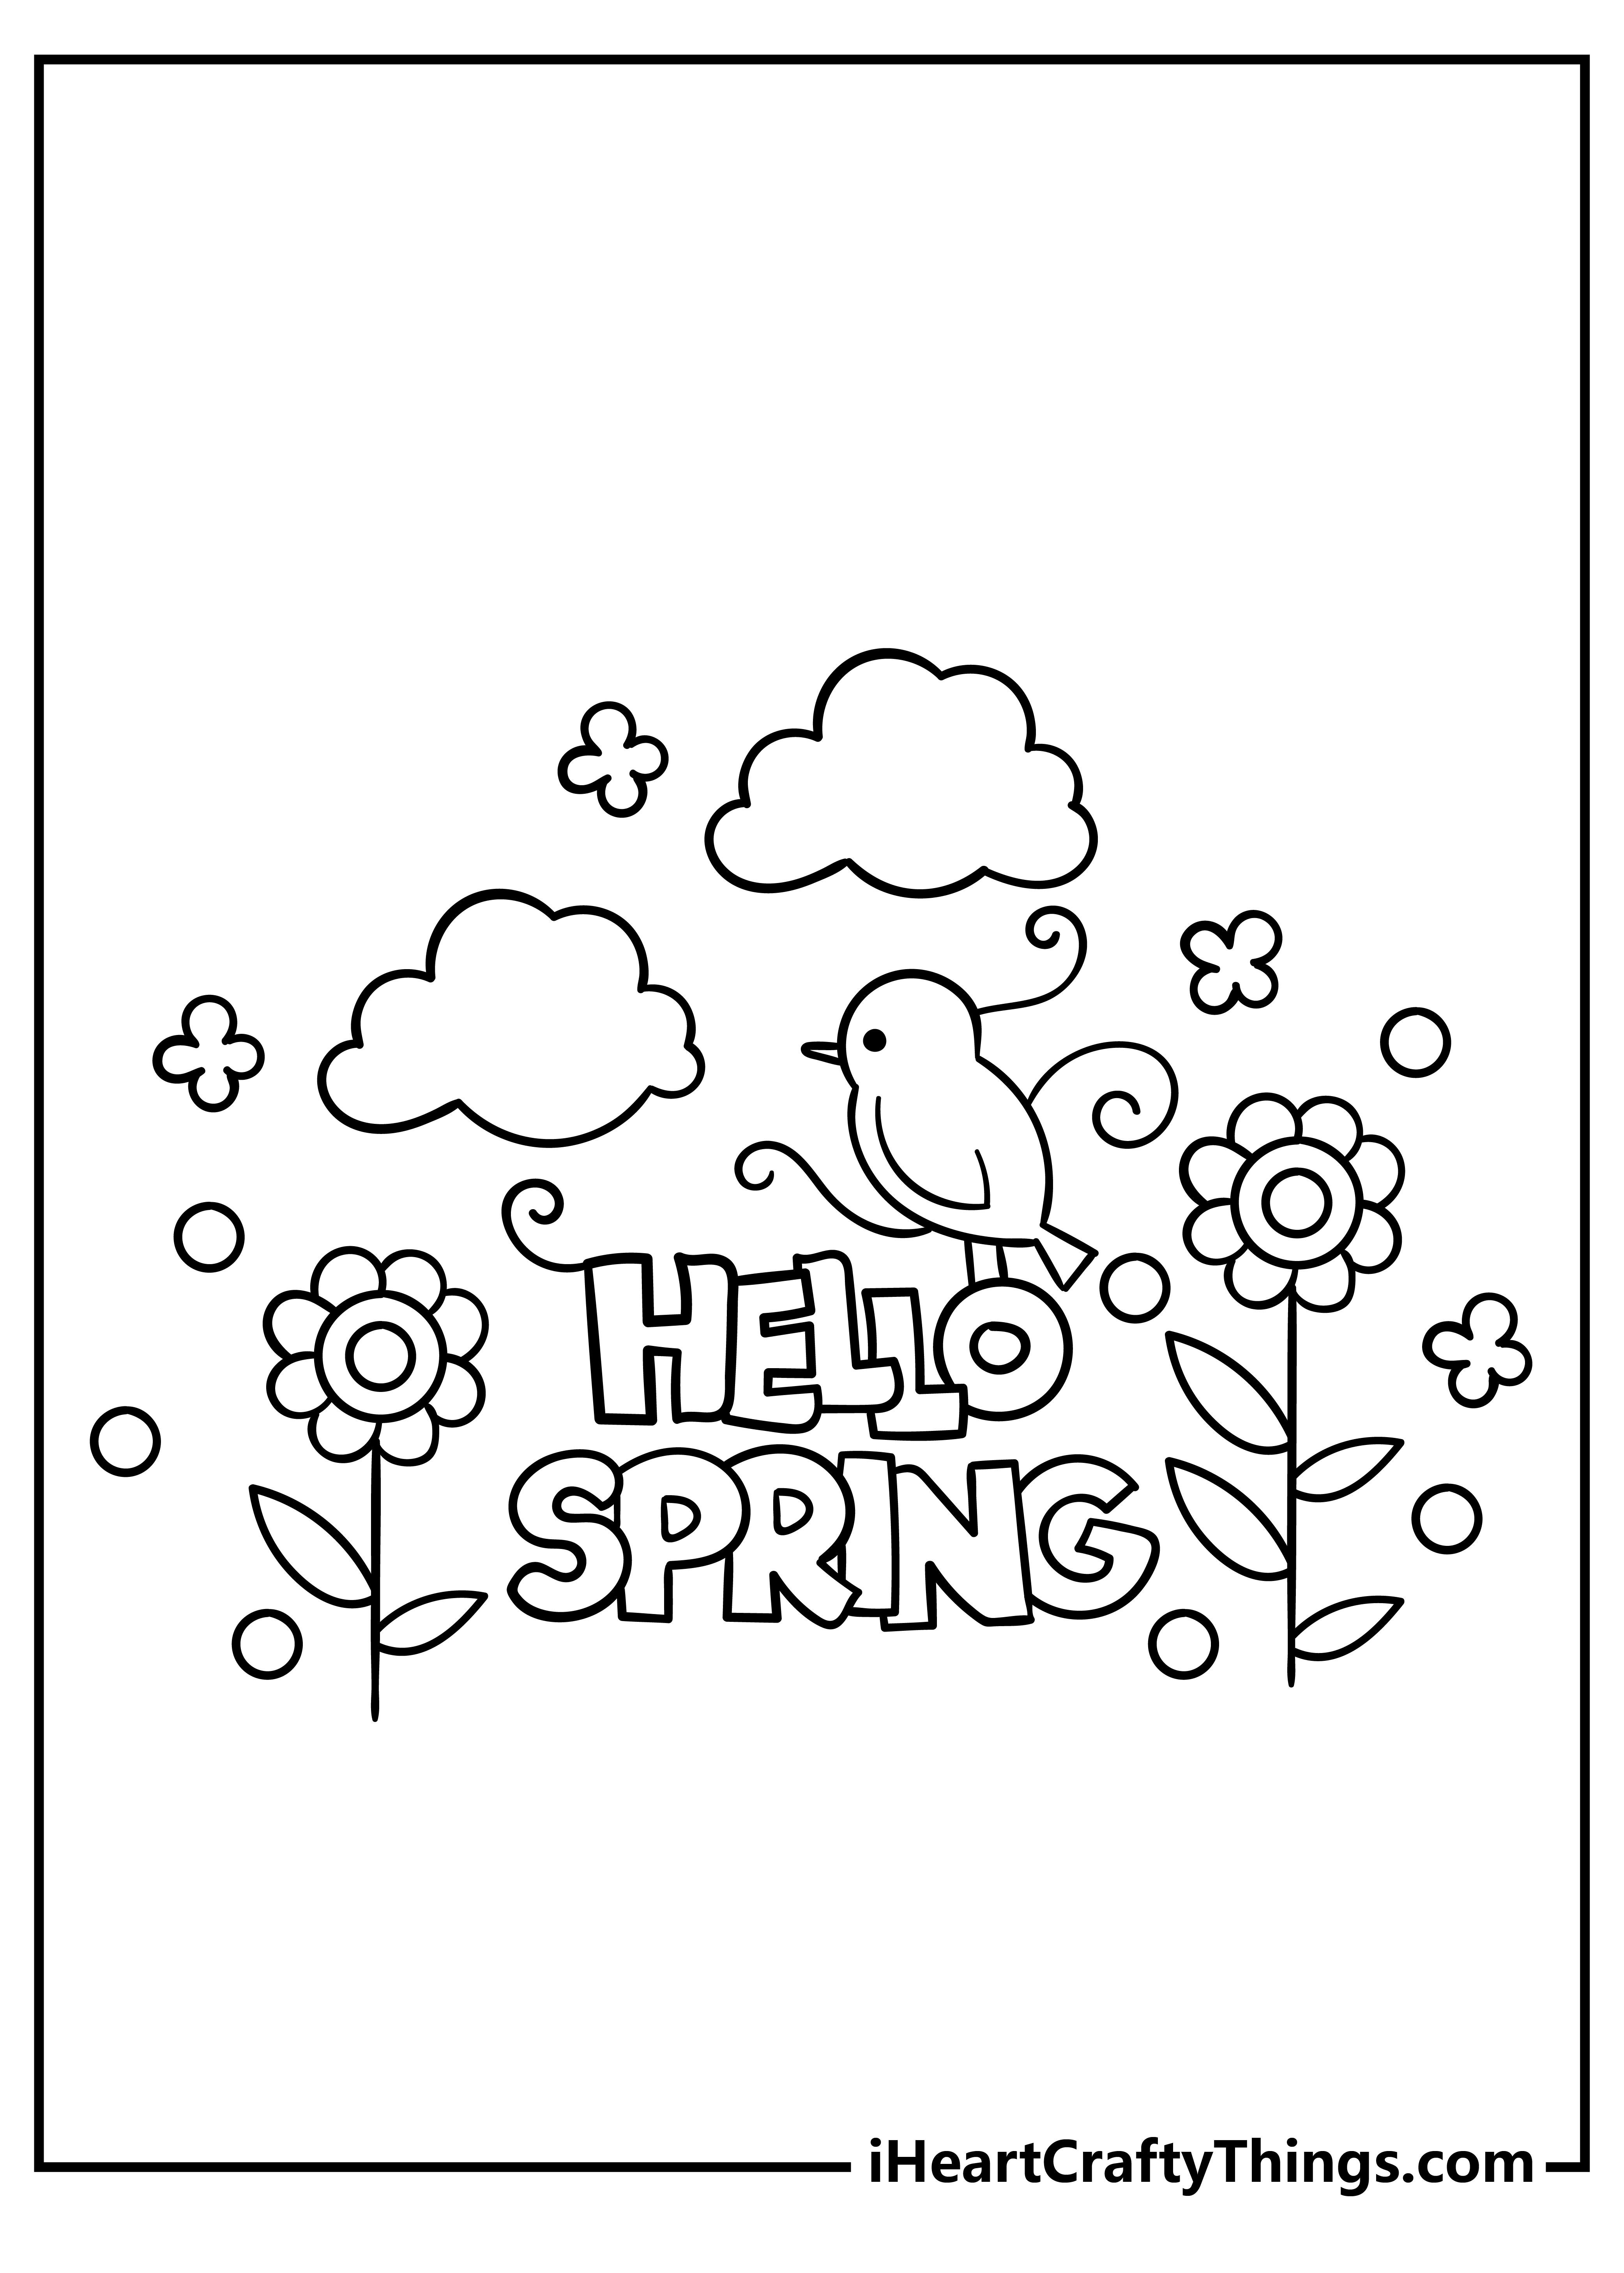 Spring Coloring Pages free pdf download